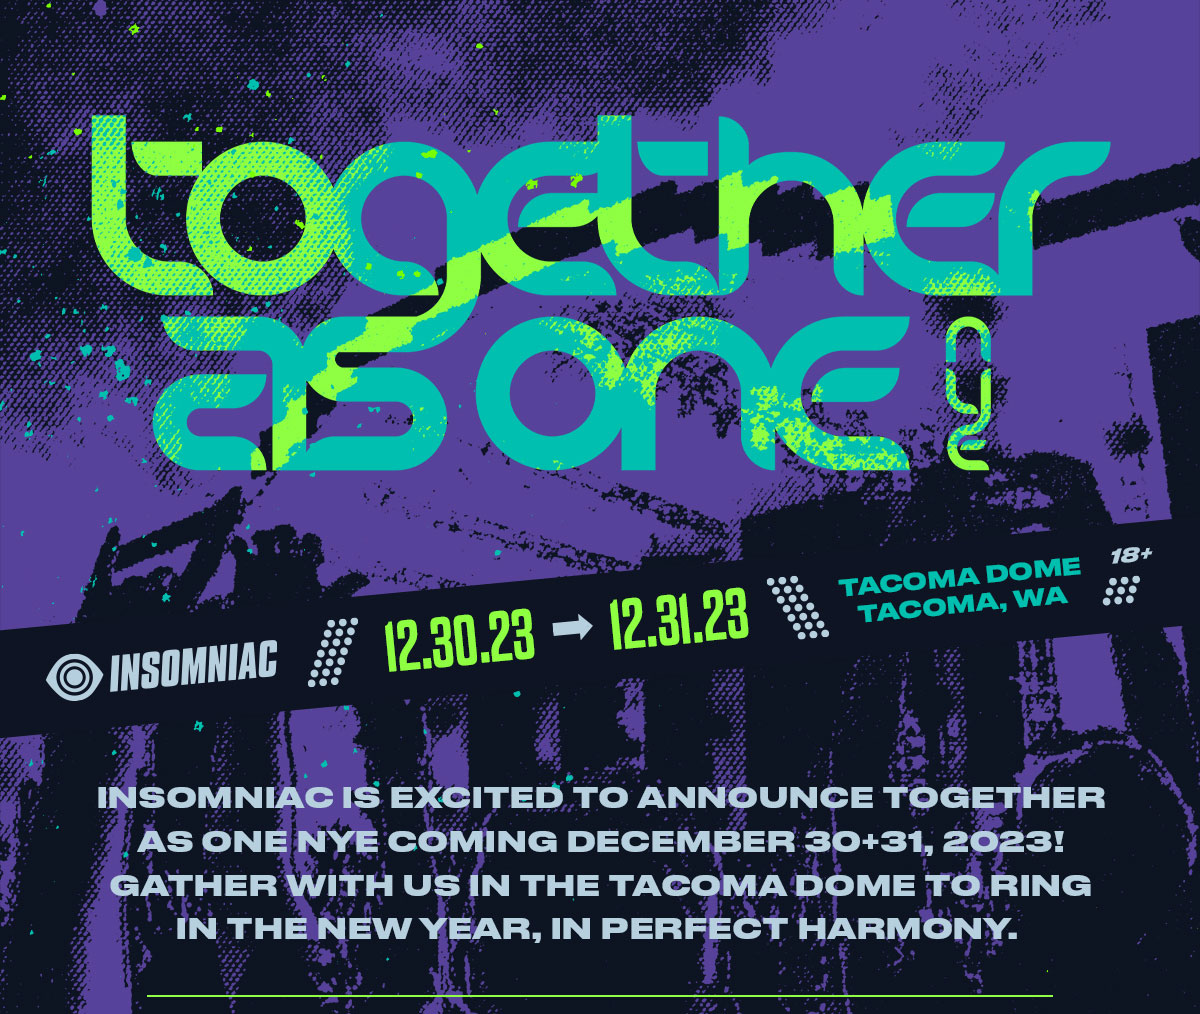 Together As One Announcement from Insomniac Events